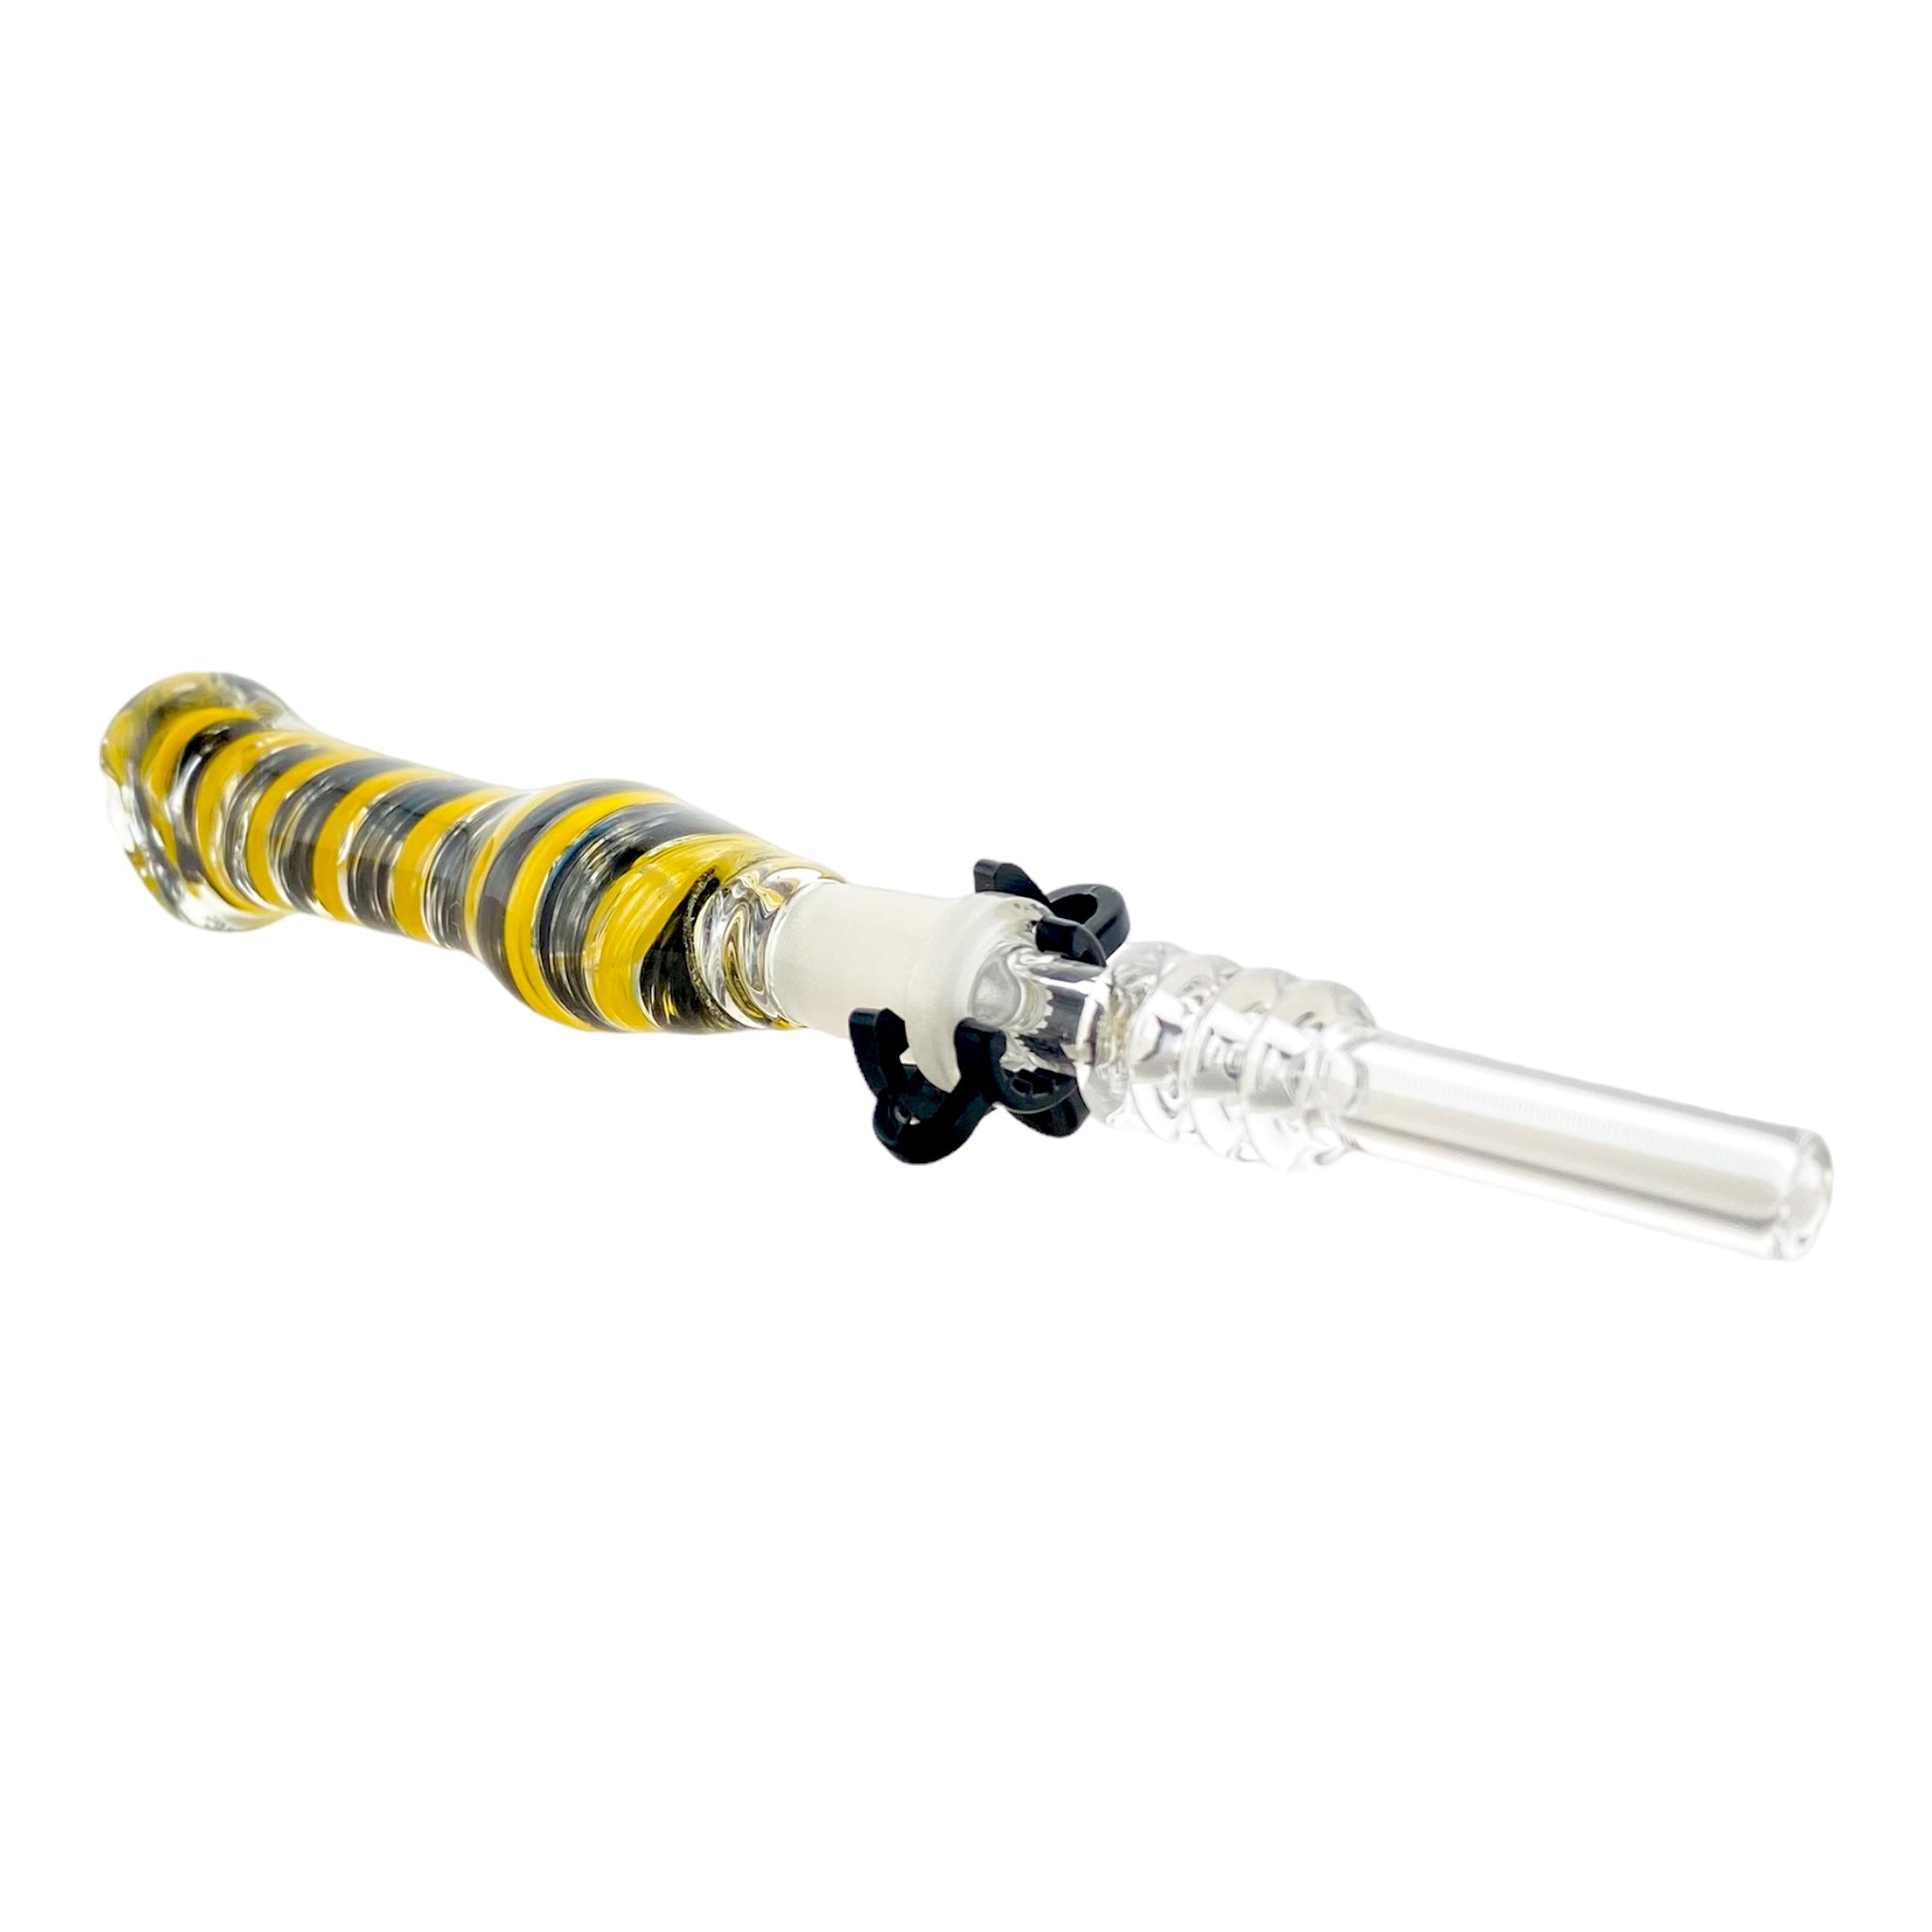 10mm Nectar Collector - Black And Yellow Inside Out With 10mm Quartz Tip